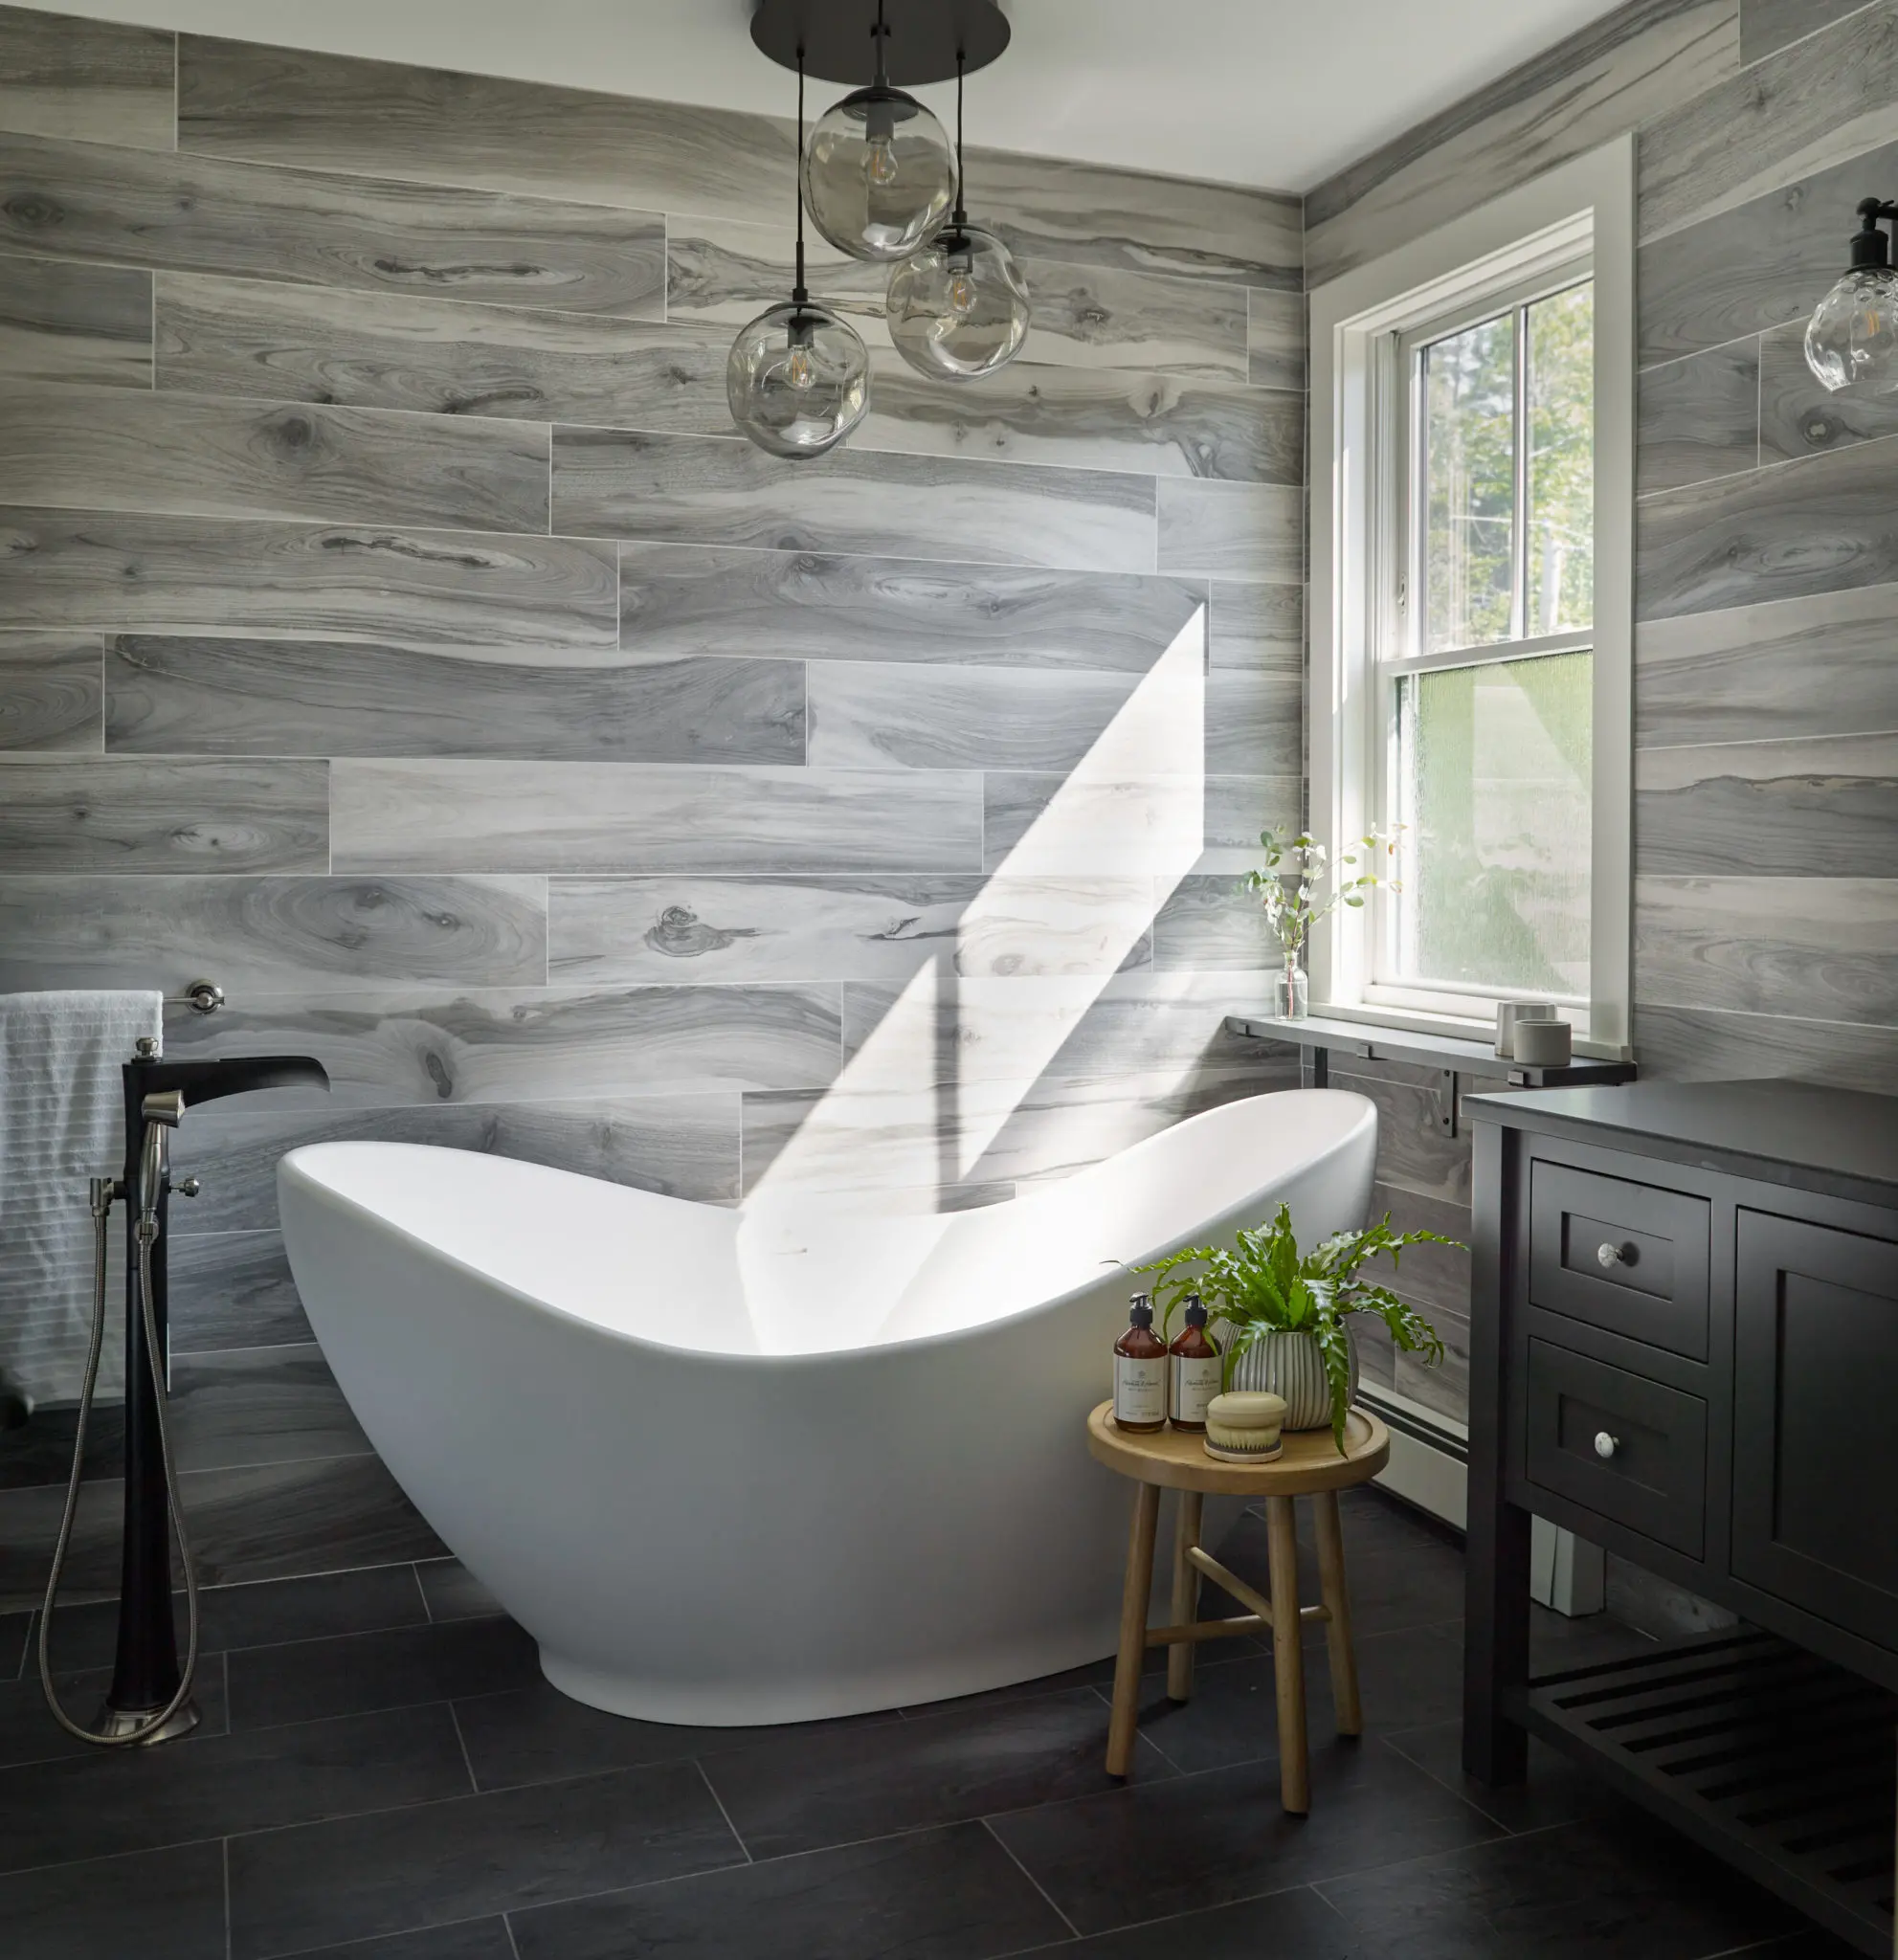 Soaking tub with freestanding faucet, modeled gray tile walls and dark gray tile floor give a spa like feel to this primary bathroom